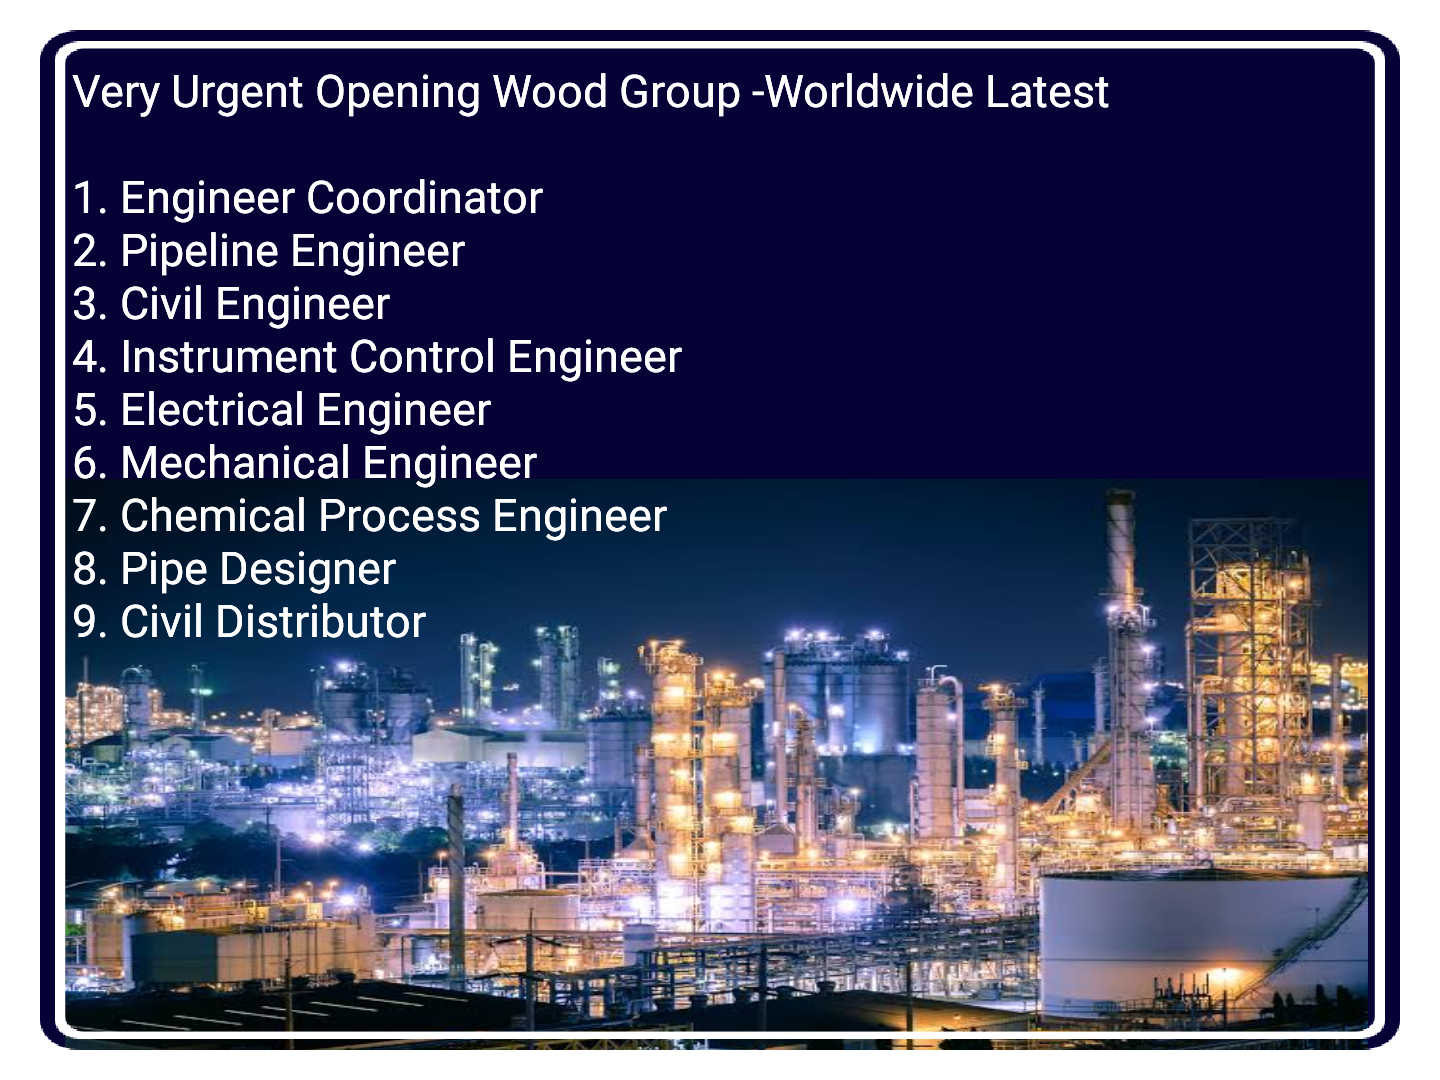 Pipeline, Civil, Instrument, Electrical, Mechanical & Chemical Process Engineer Jobs